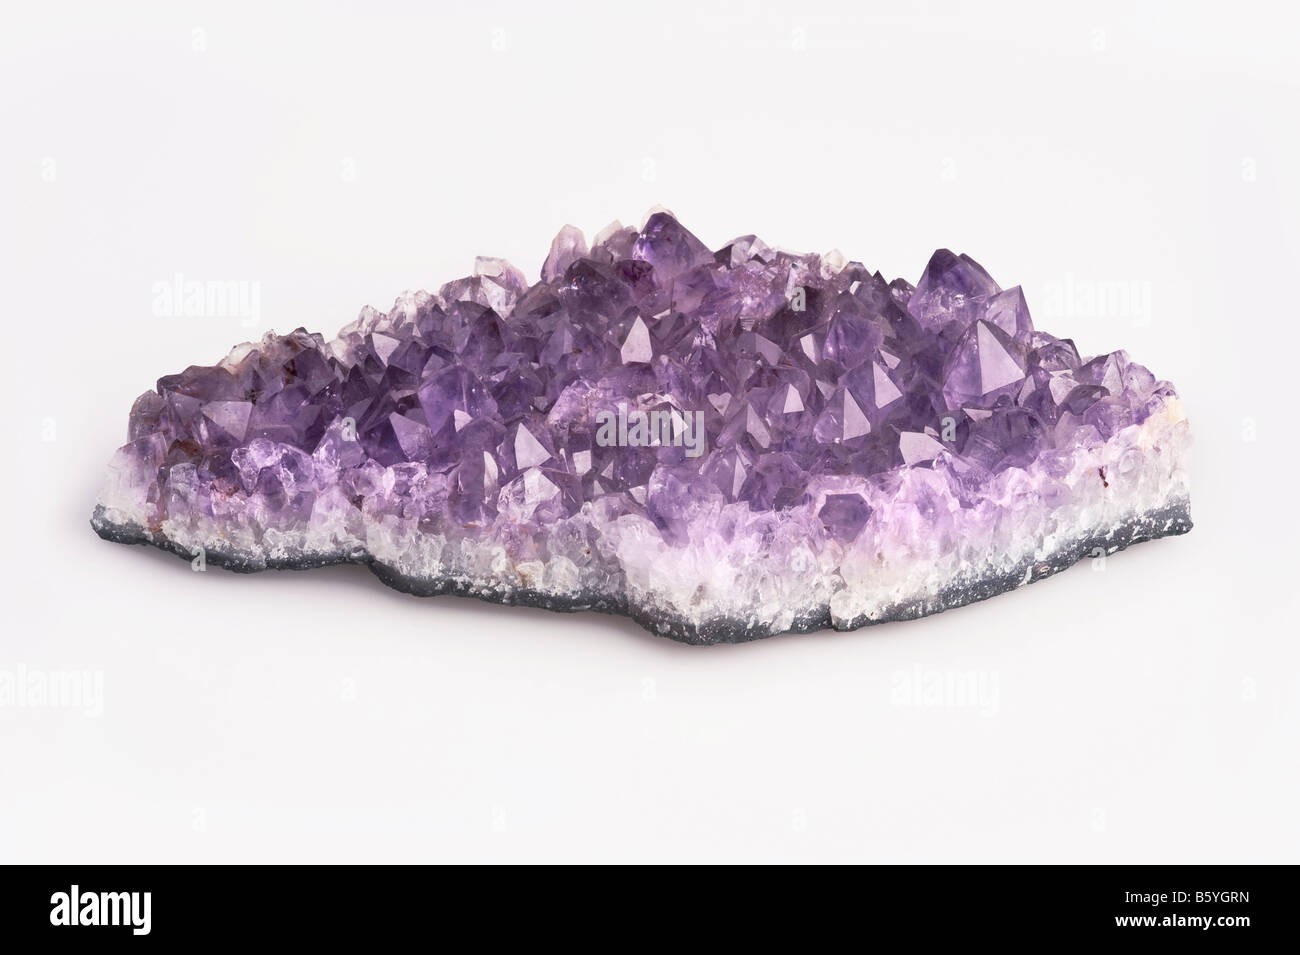 Amethyst crystal cluster on white background Stock Photo